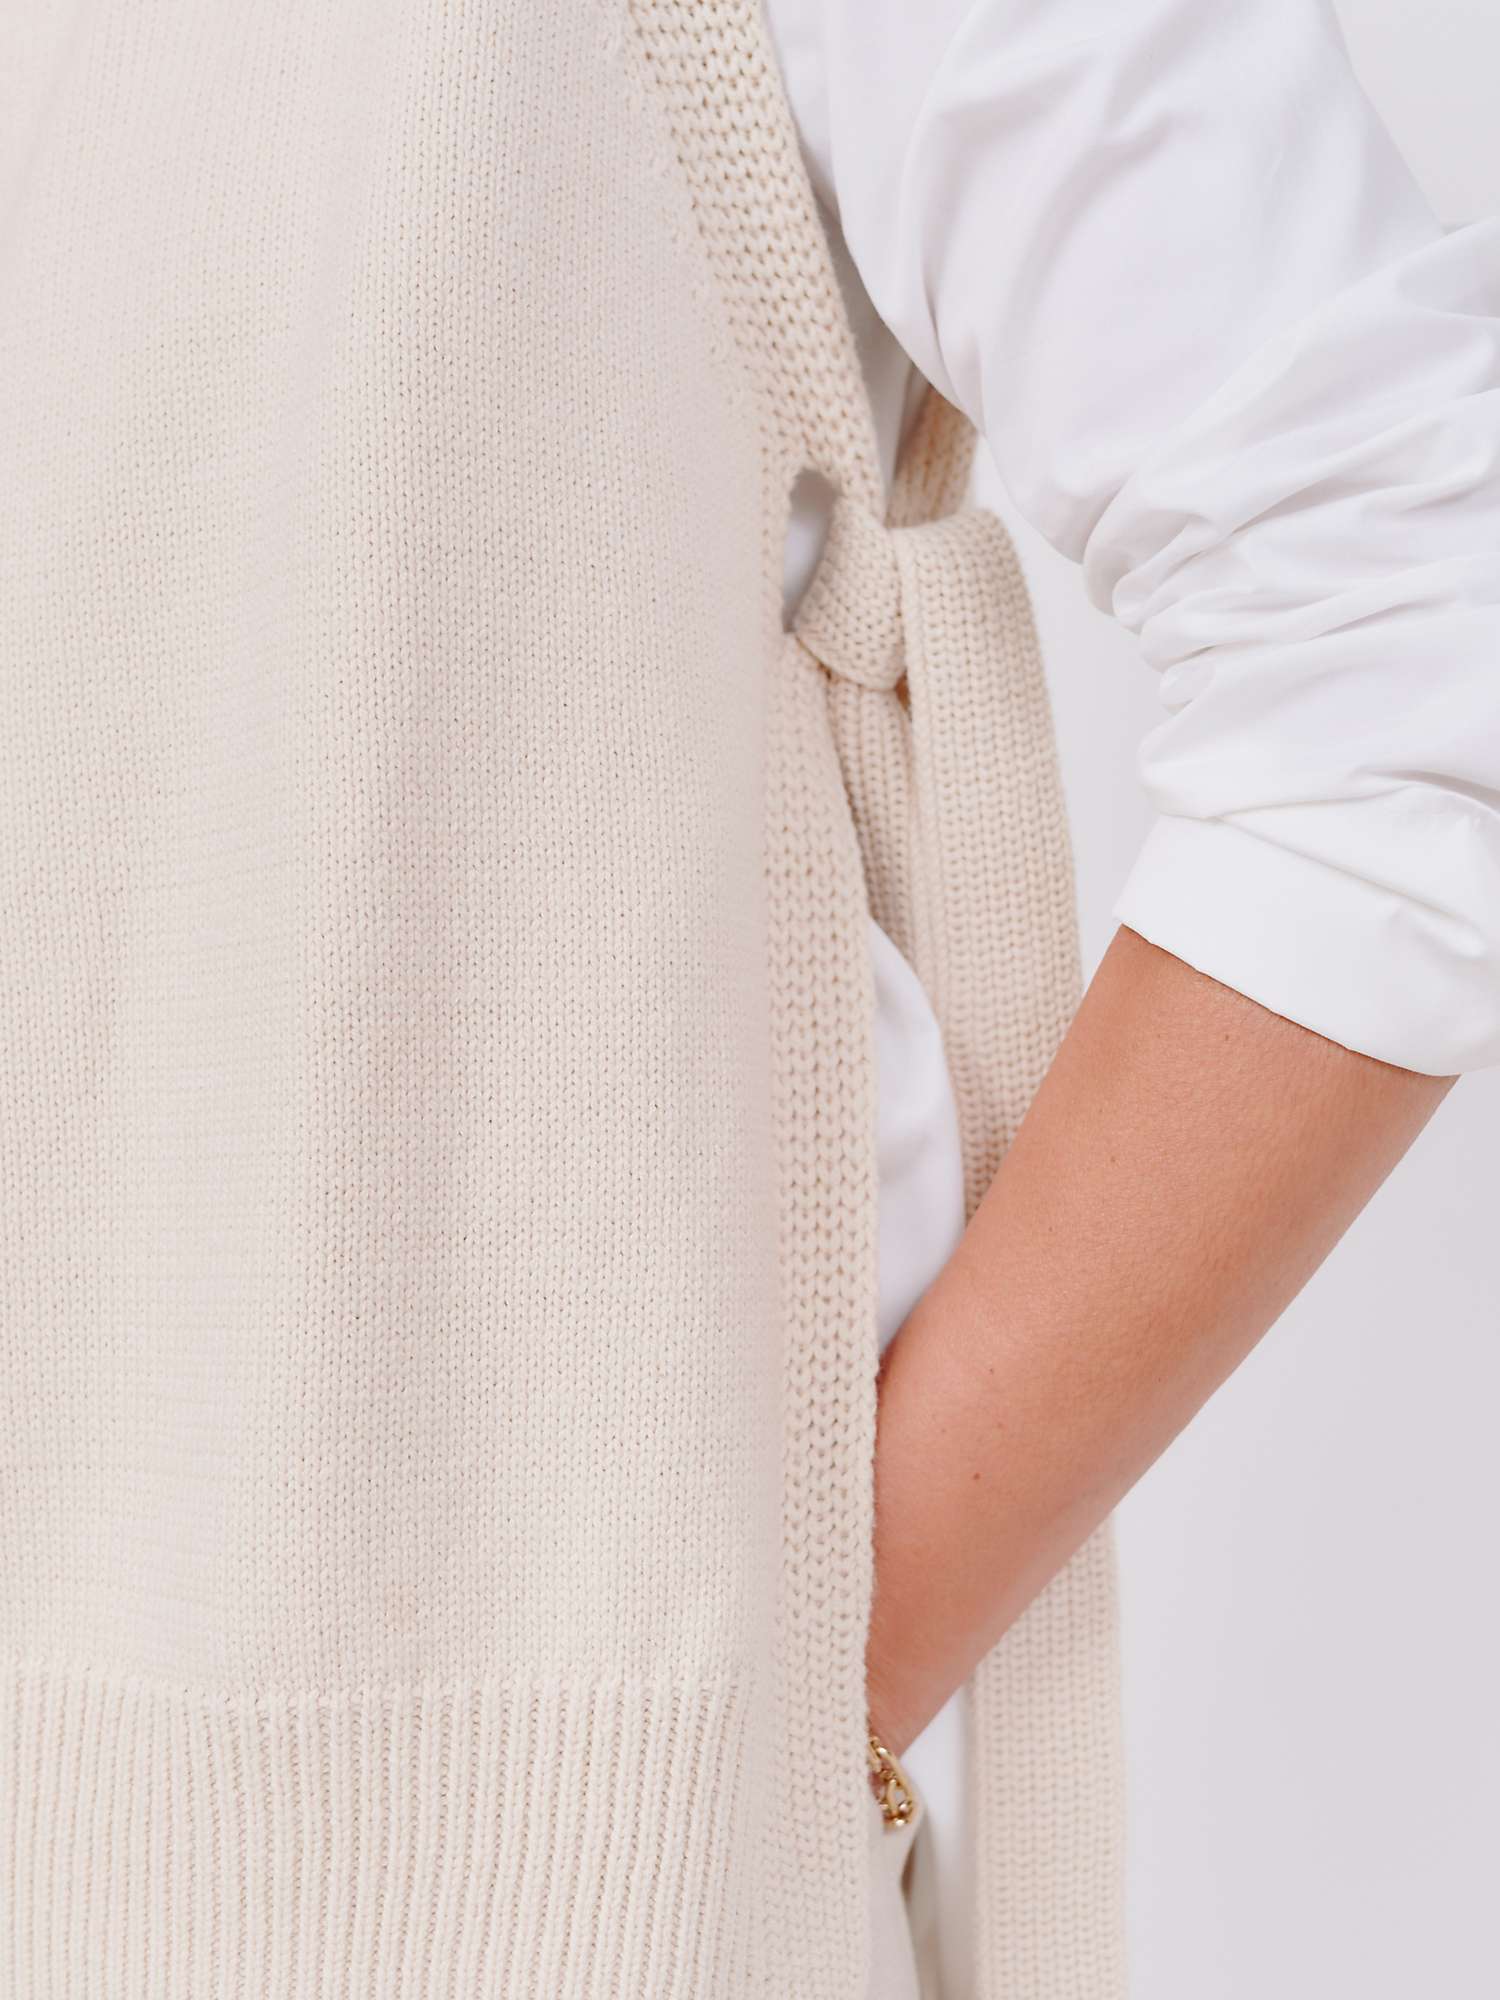 Buy Vivere By Savannah Miller Charlotte Tabard Knit Top, Oatmeal Online at johnlewis.com